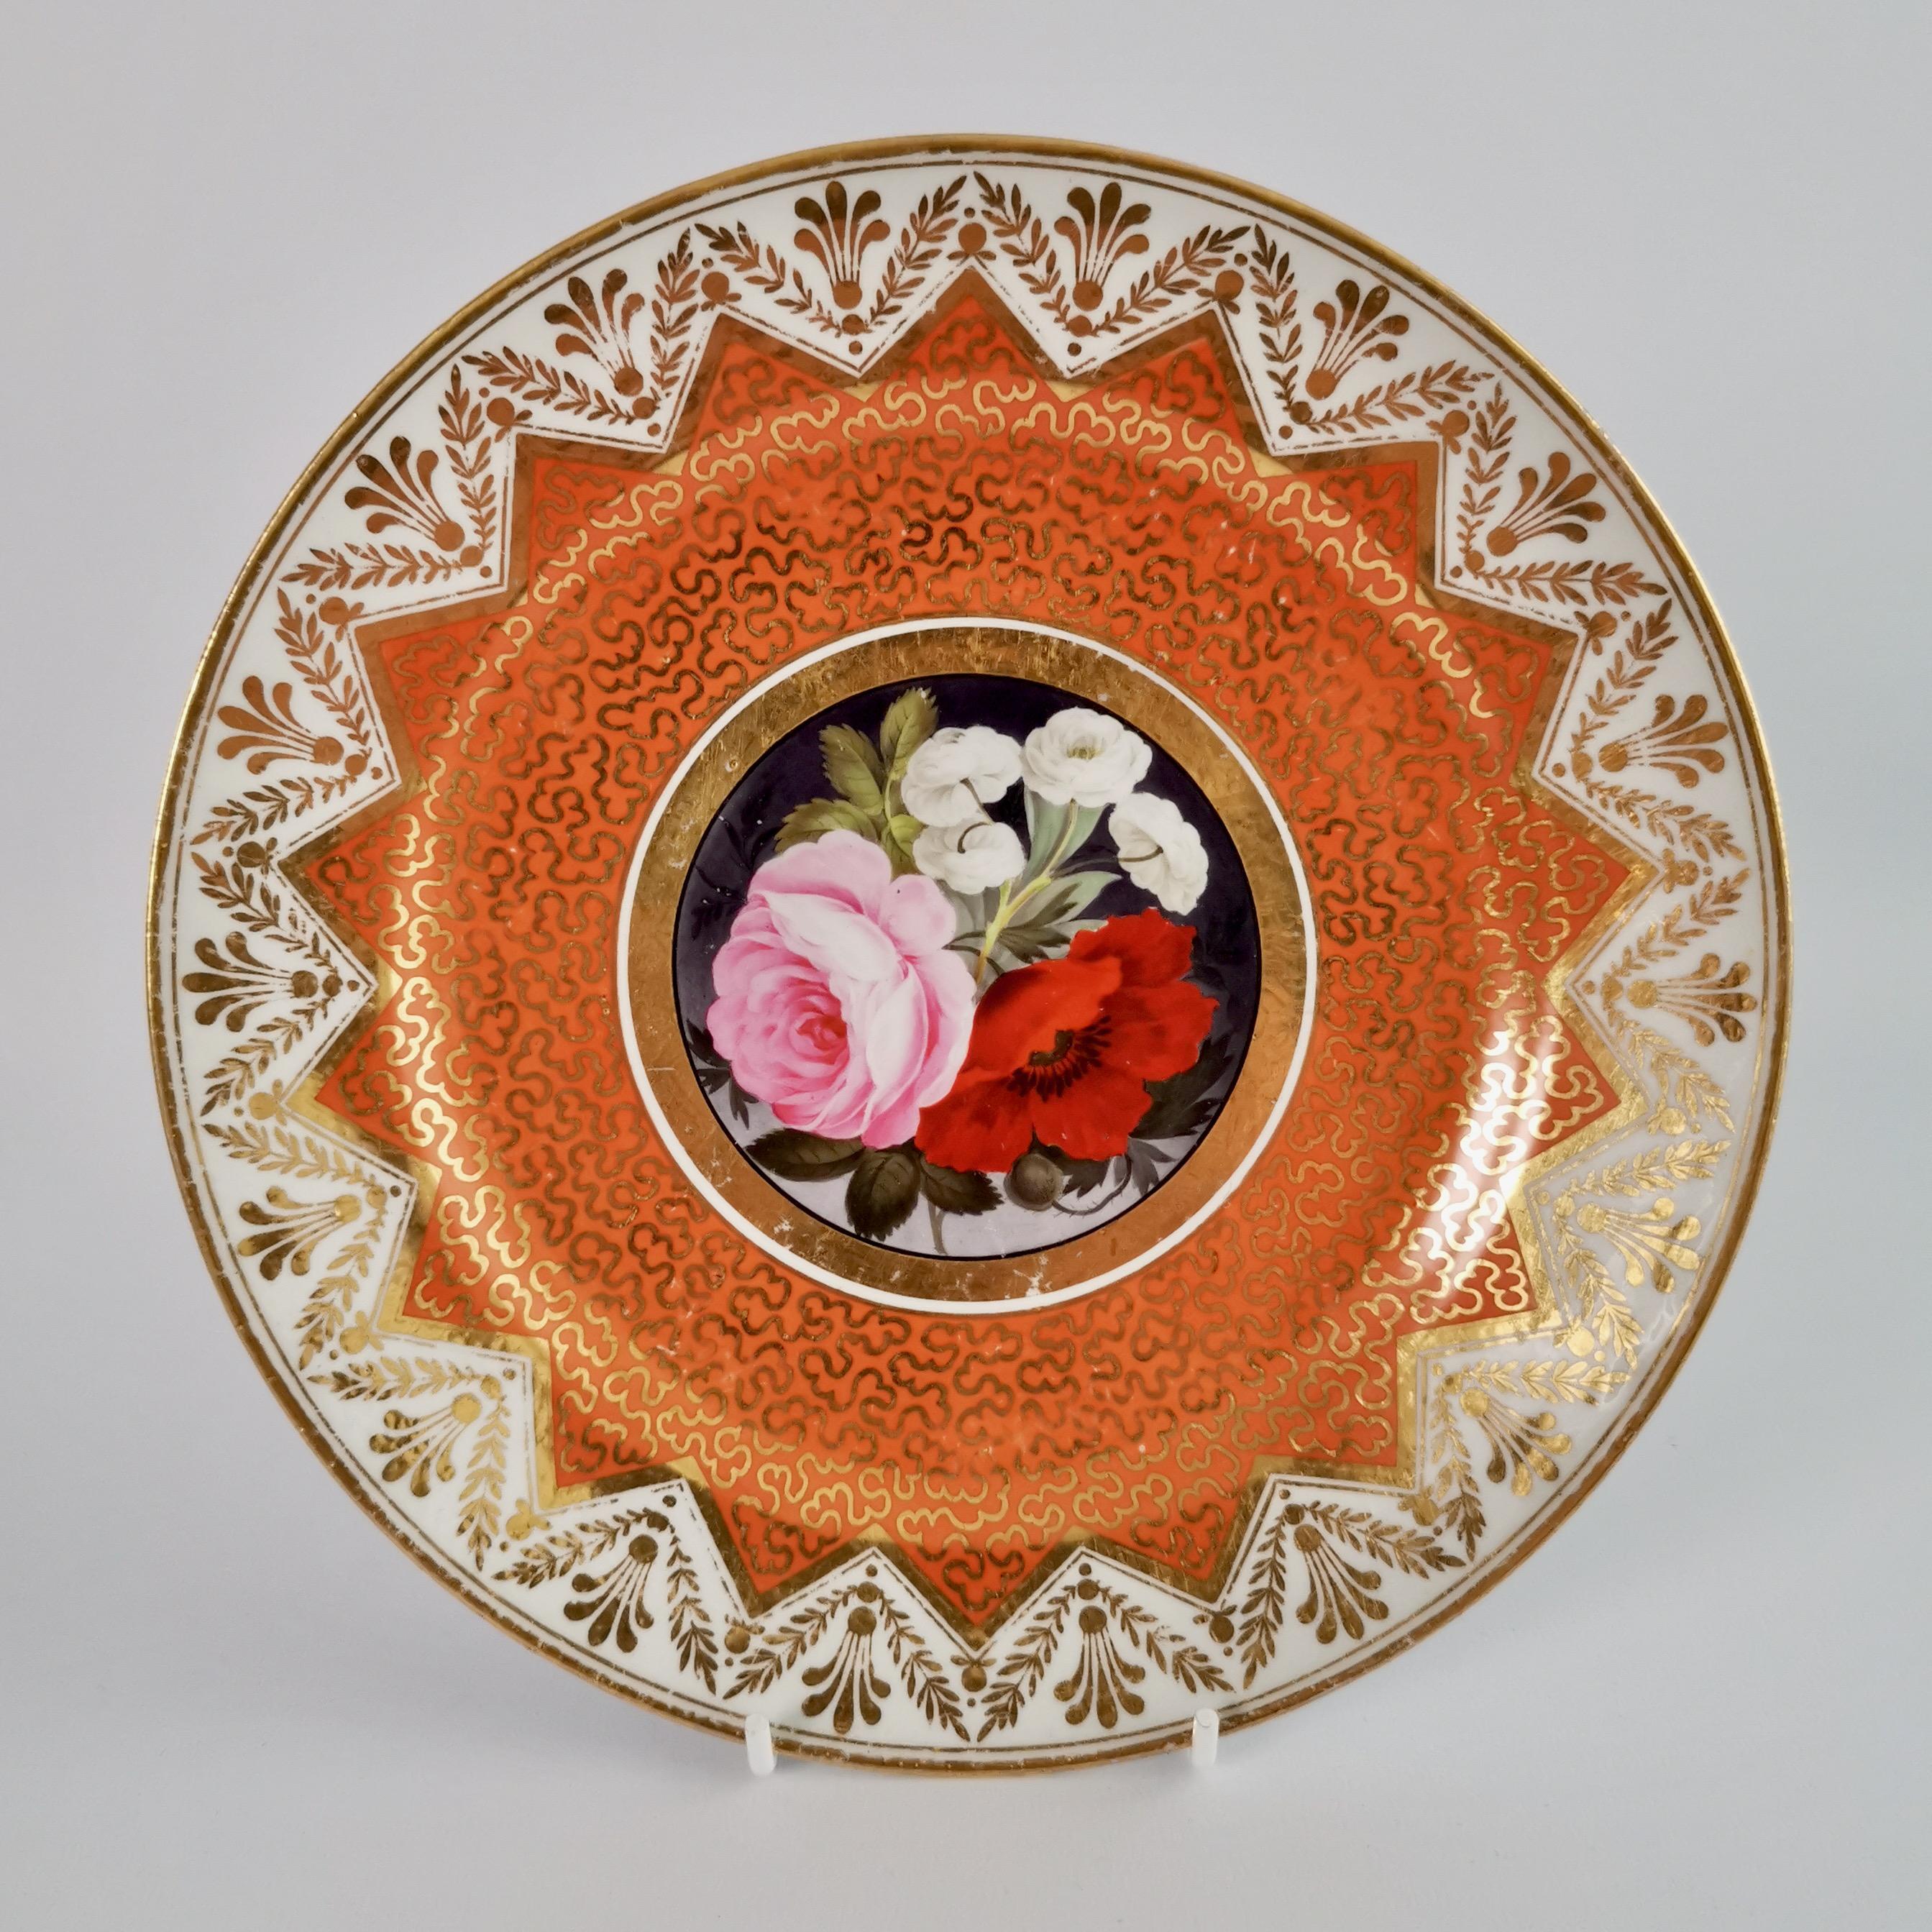 Early 19th Century Chamberlains Worcester Set of Plates, Orange, Paintings by H. Chamberlain, 1815